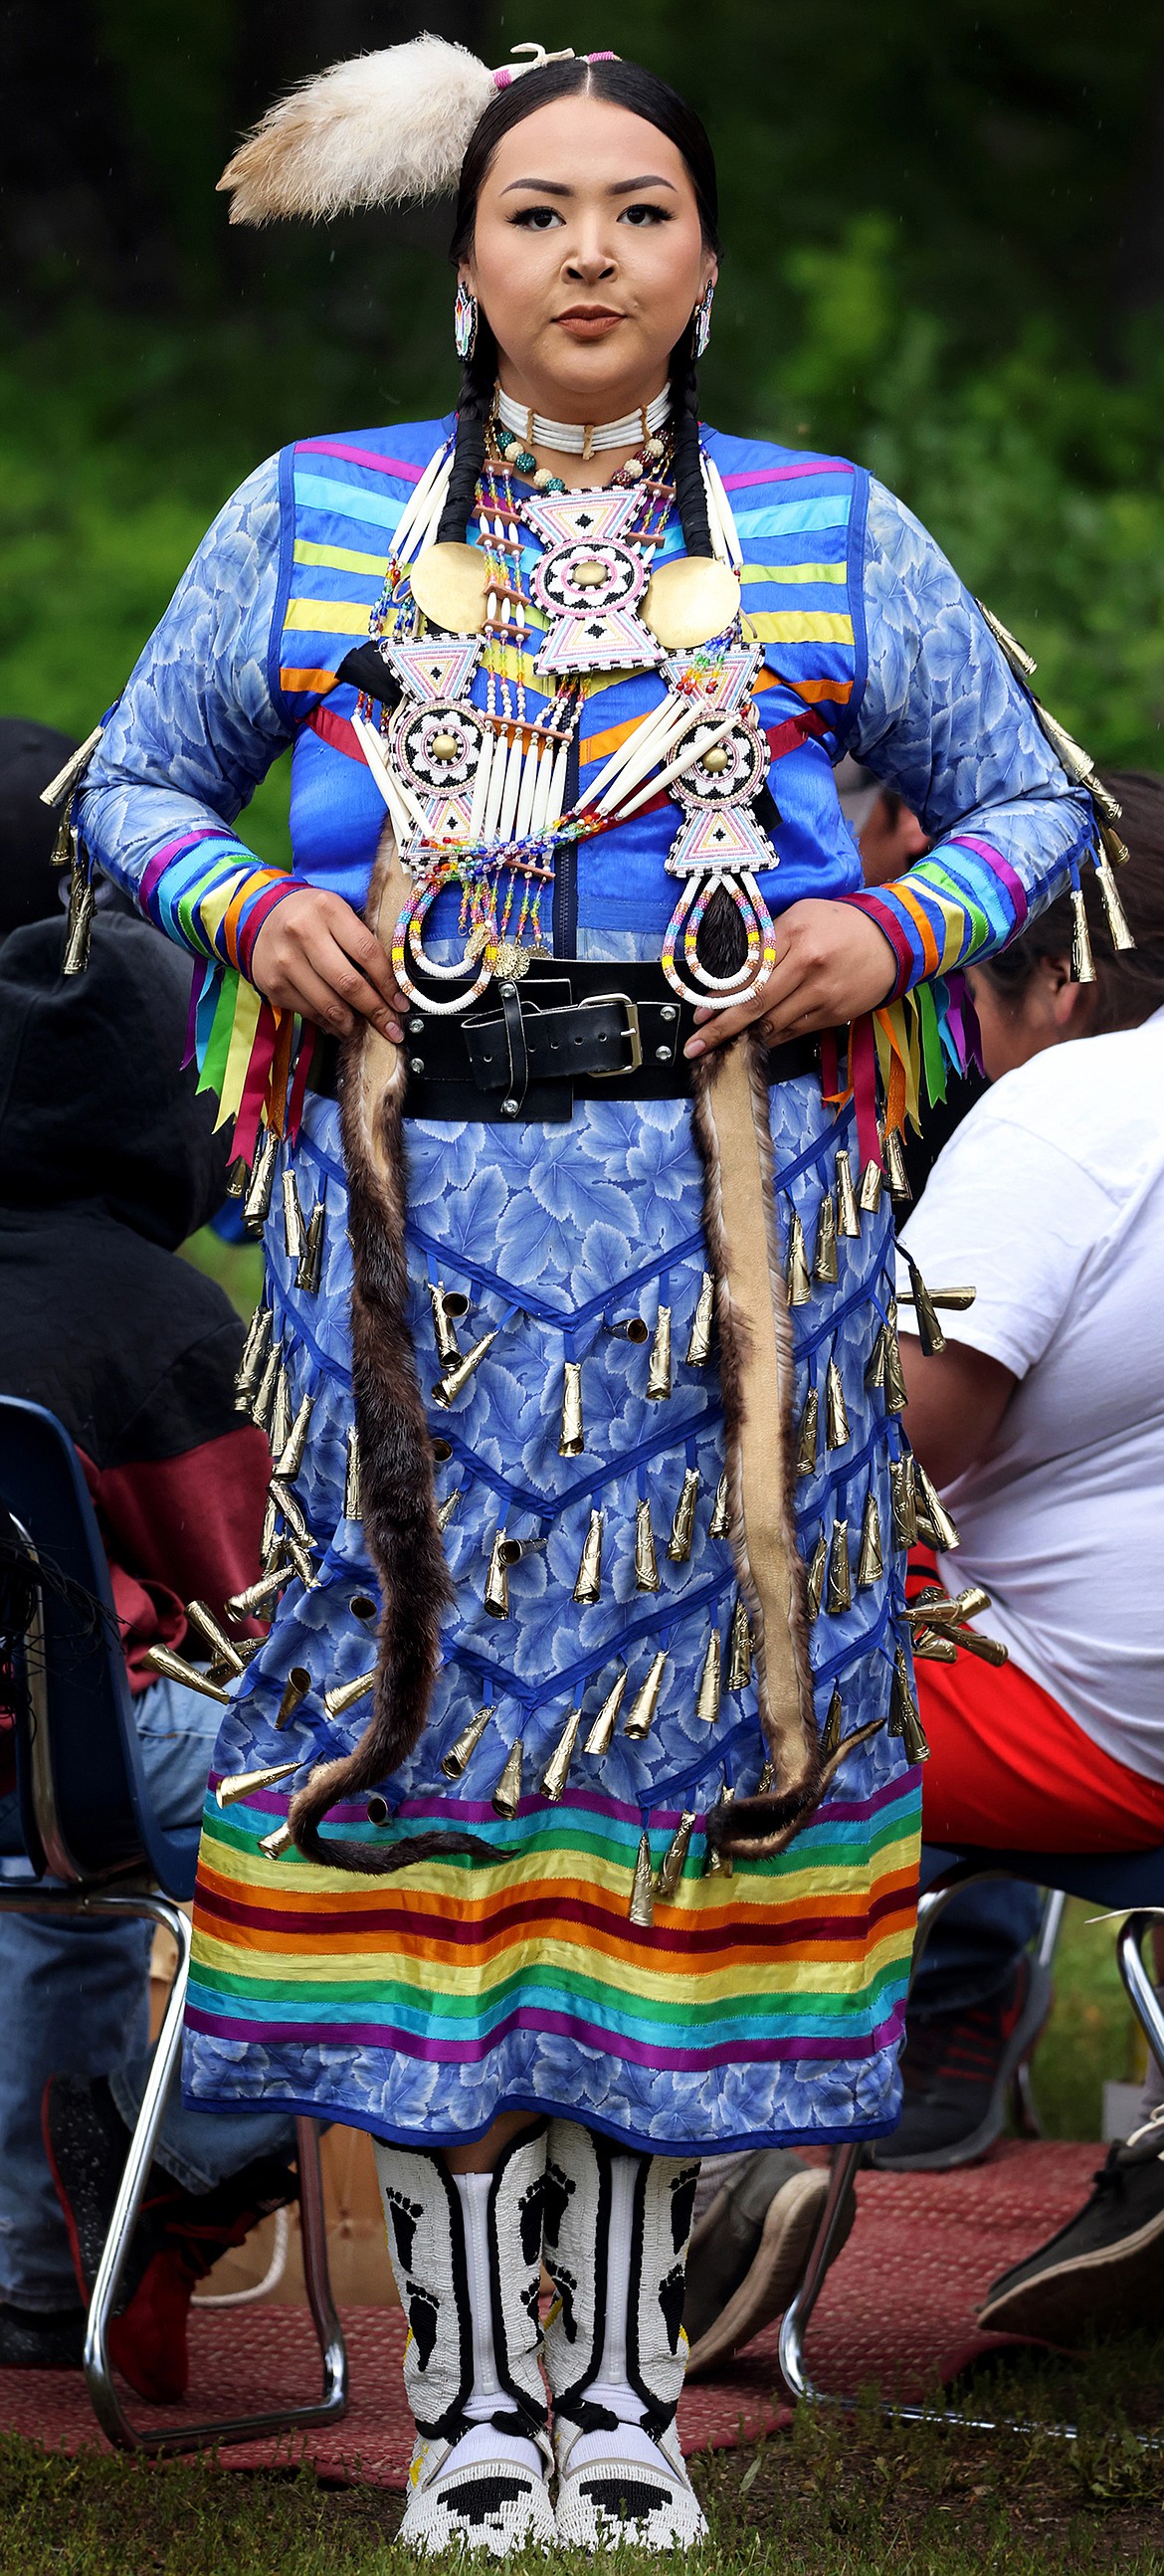 Jusine ScabbyRobe and the Blackfeet Singers and Dancers performed at the Rising Sun Picnic area as part of Glacier National Park's Native America Speaks program Wednesday, June 29. (Jeremy Weber/Daily Inter Lake)